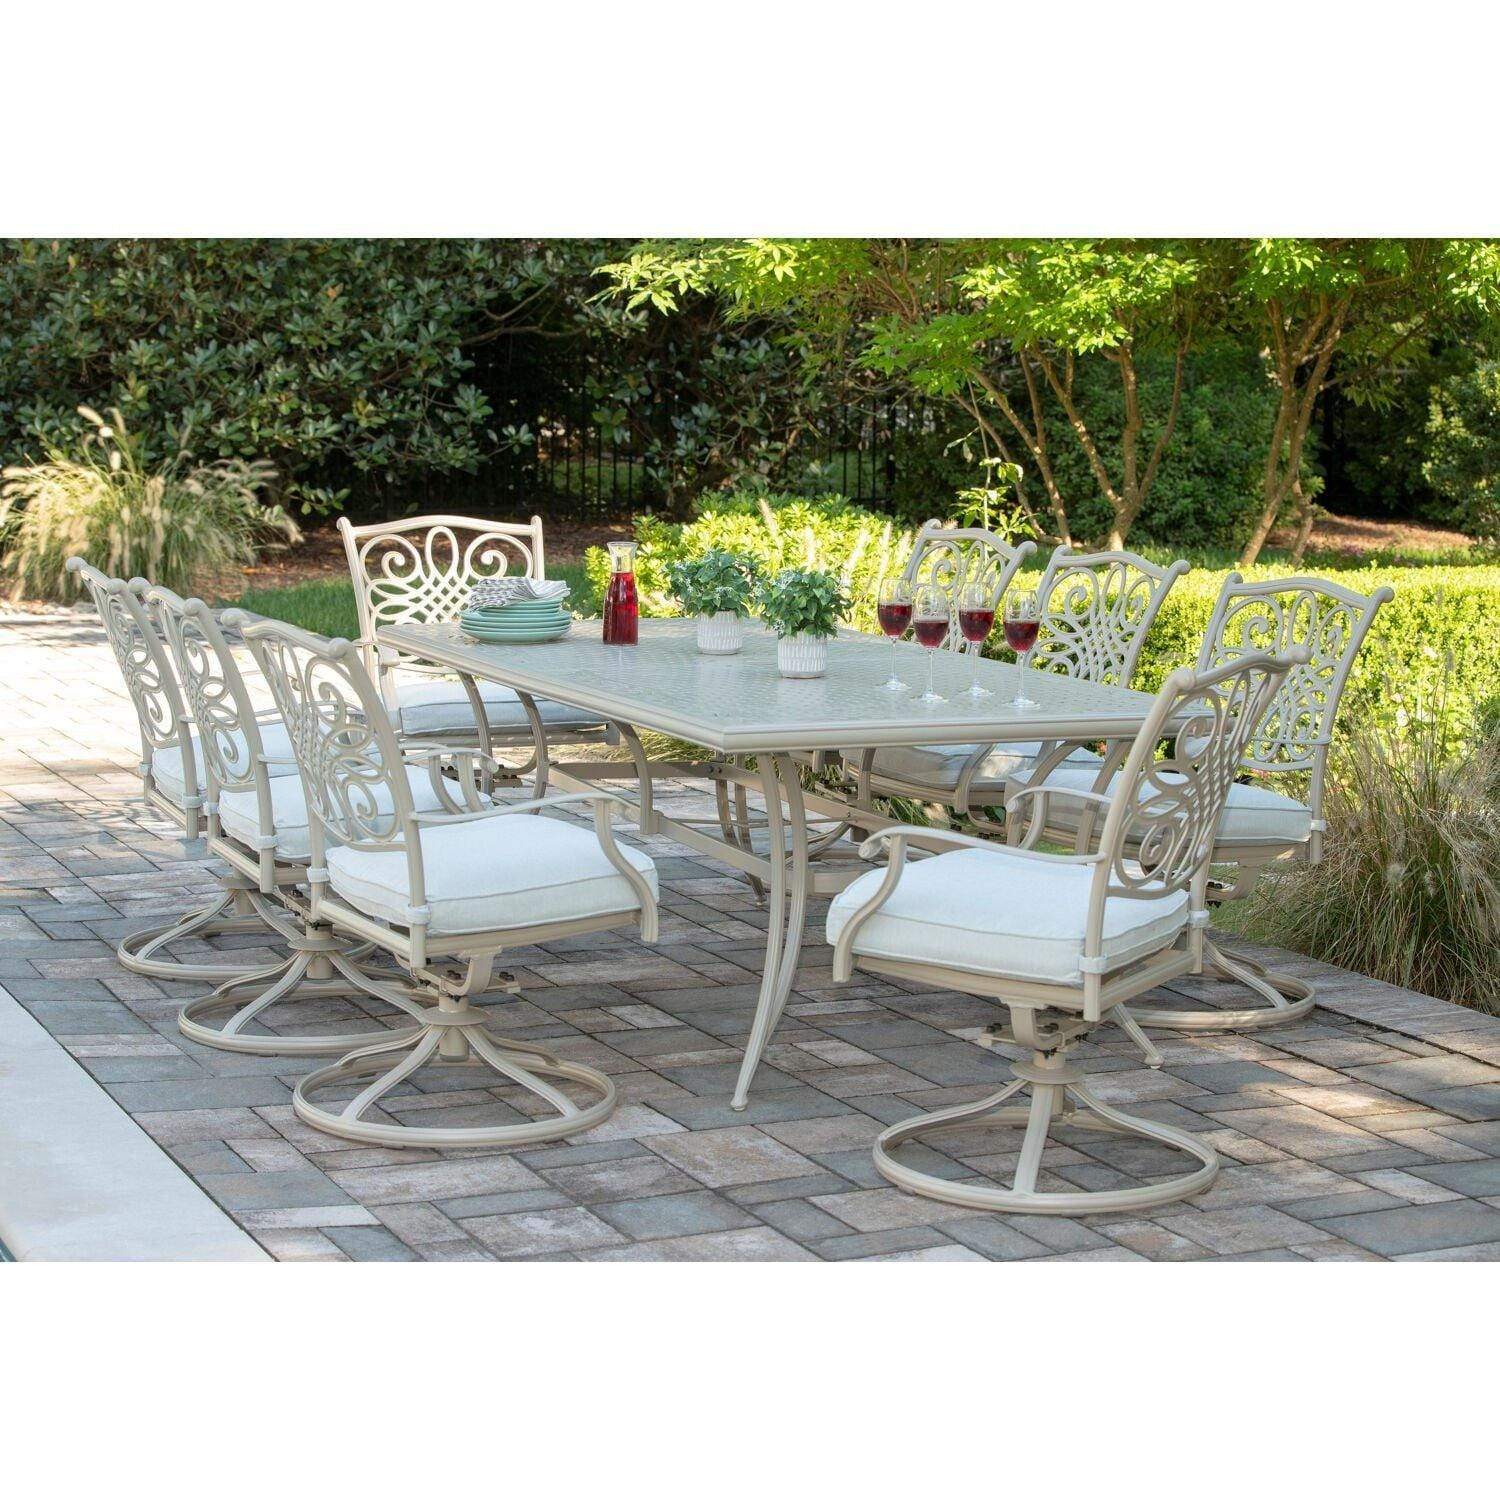 Hanover Outdoor Dining Set Hanover Traditions 9-Piece Dining Set with 8 Swivel Rockers, Large 84-in. x 42-in. Cast-top Table, 11-Ft. Table - TRADDNSD9PCSW8-BE